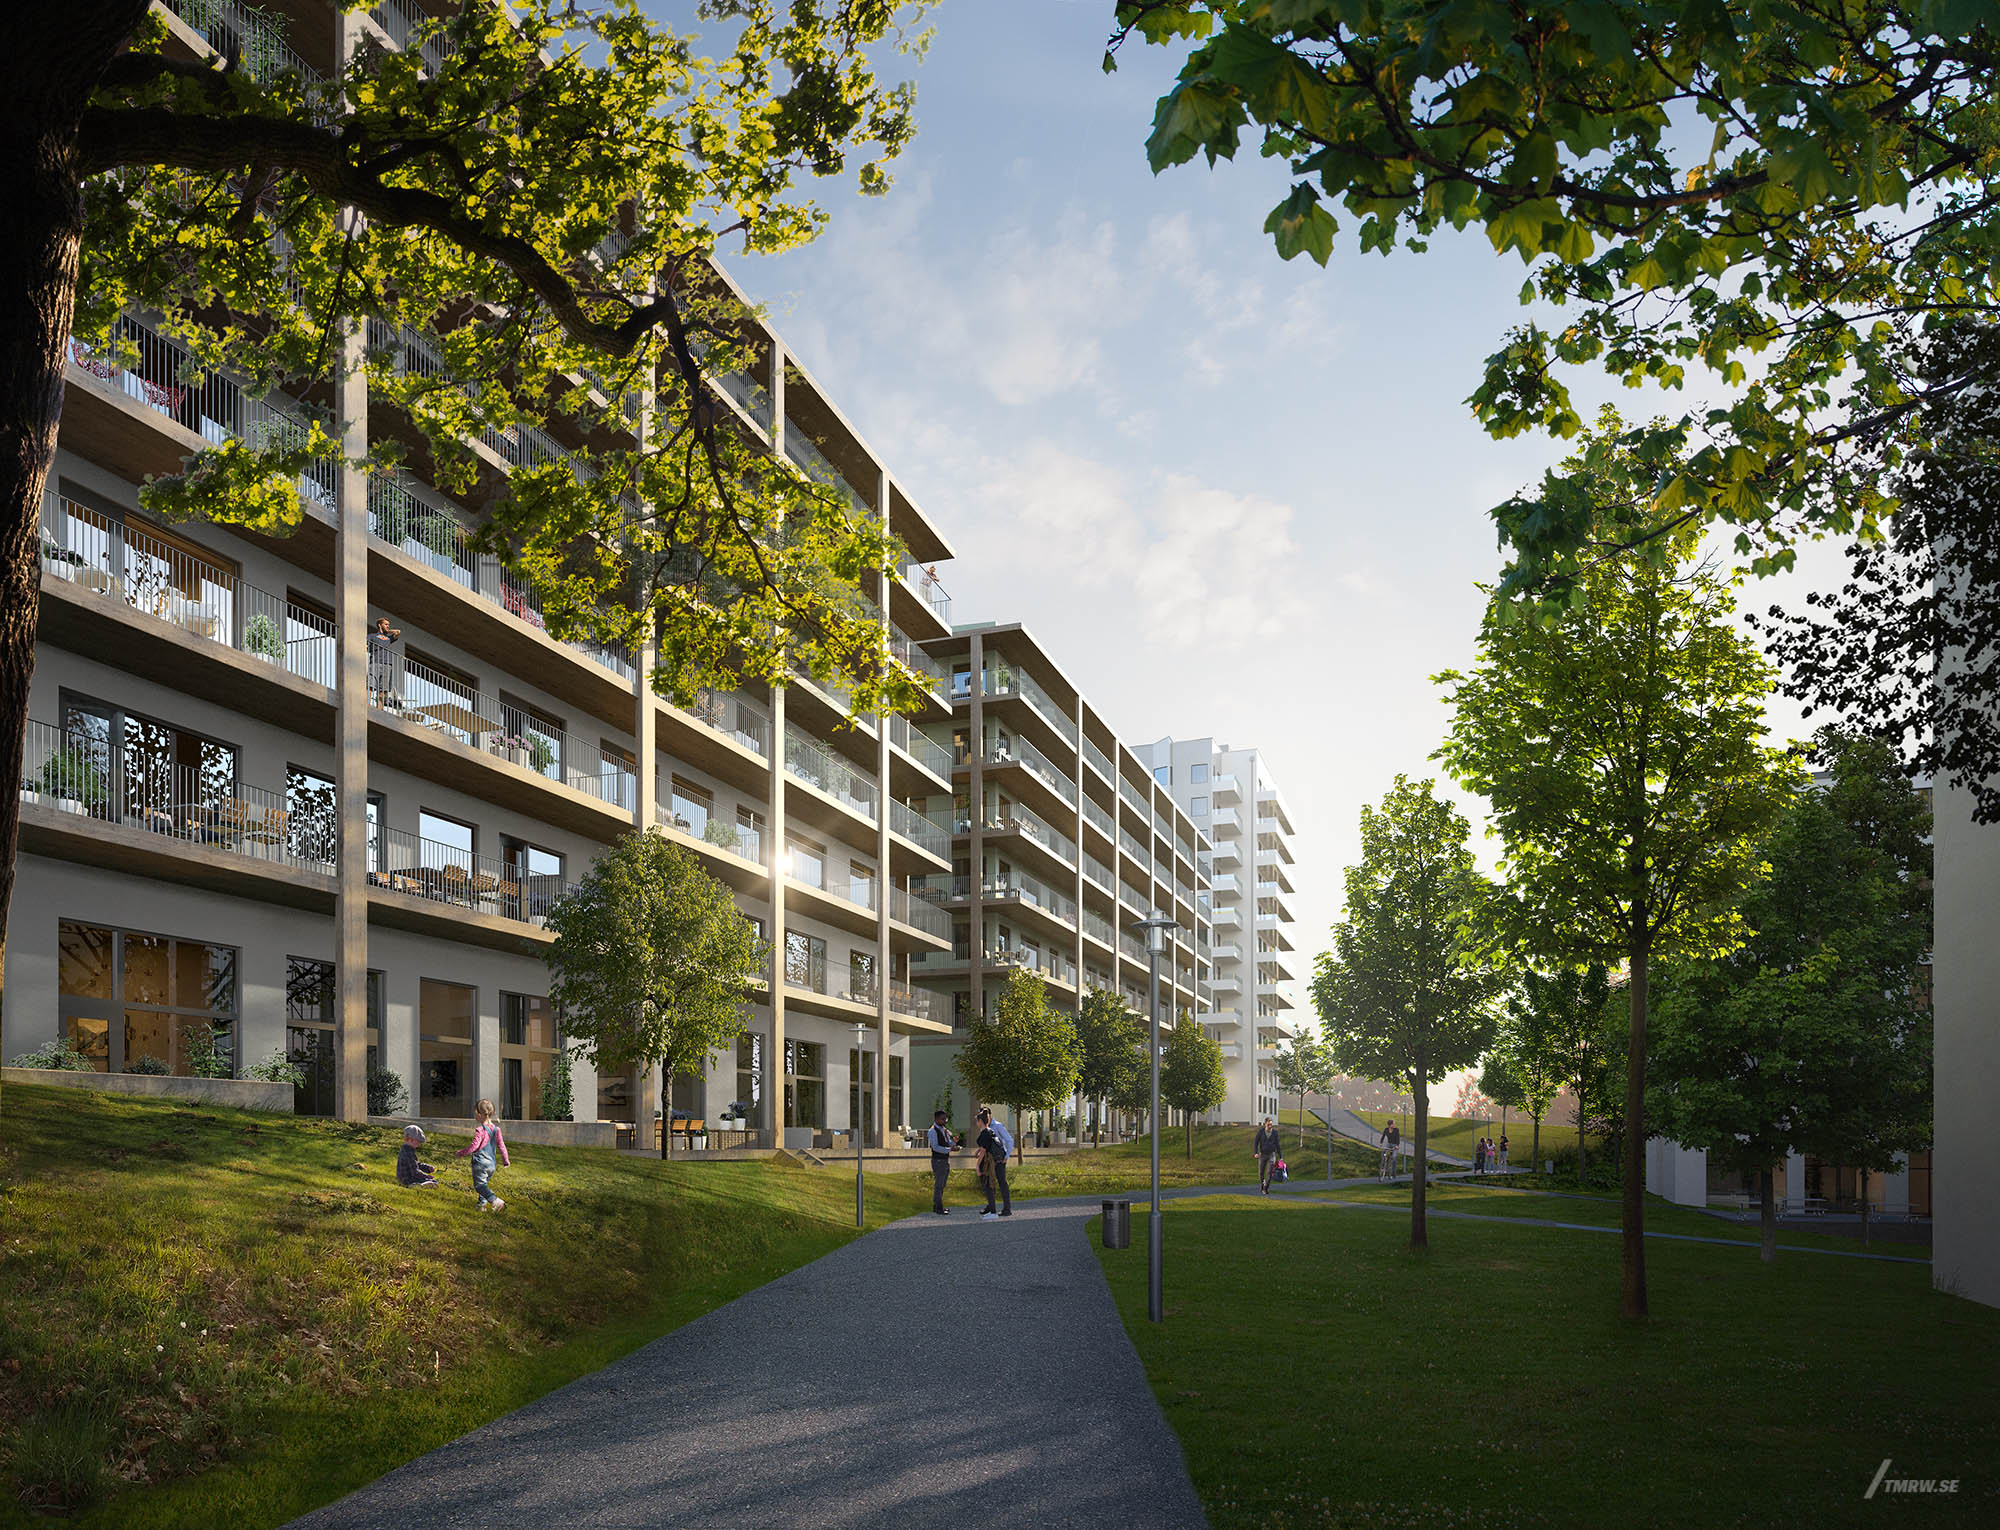 Architectural visualization of Farsta Strand for Rits a apartment house in day light from an street view.